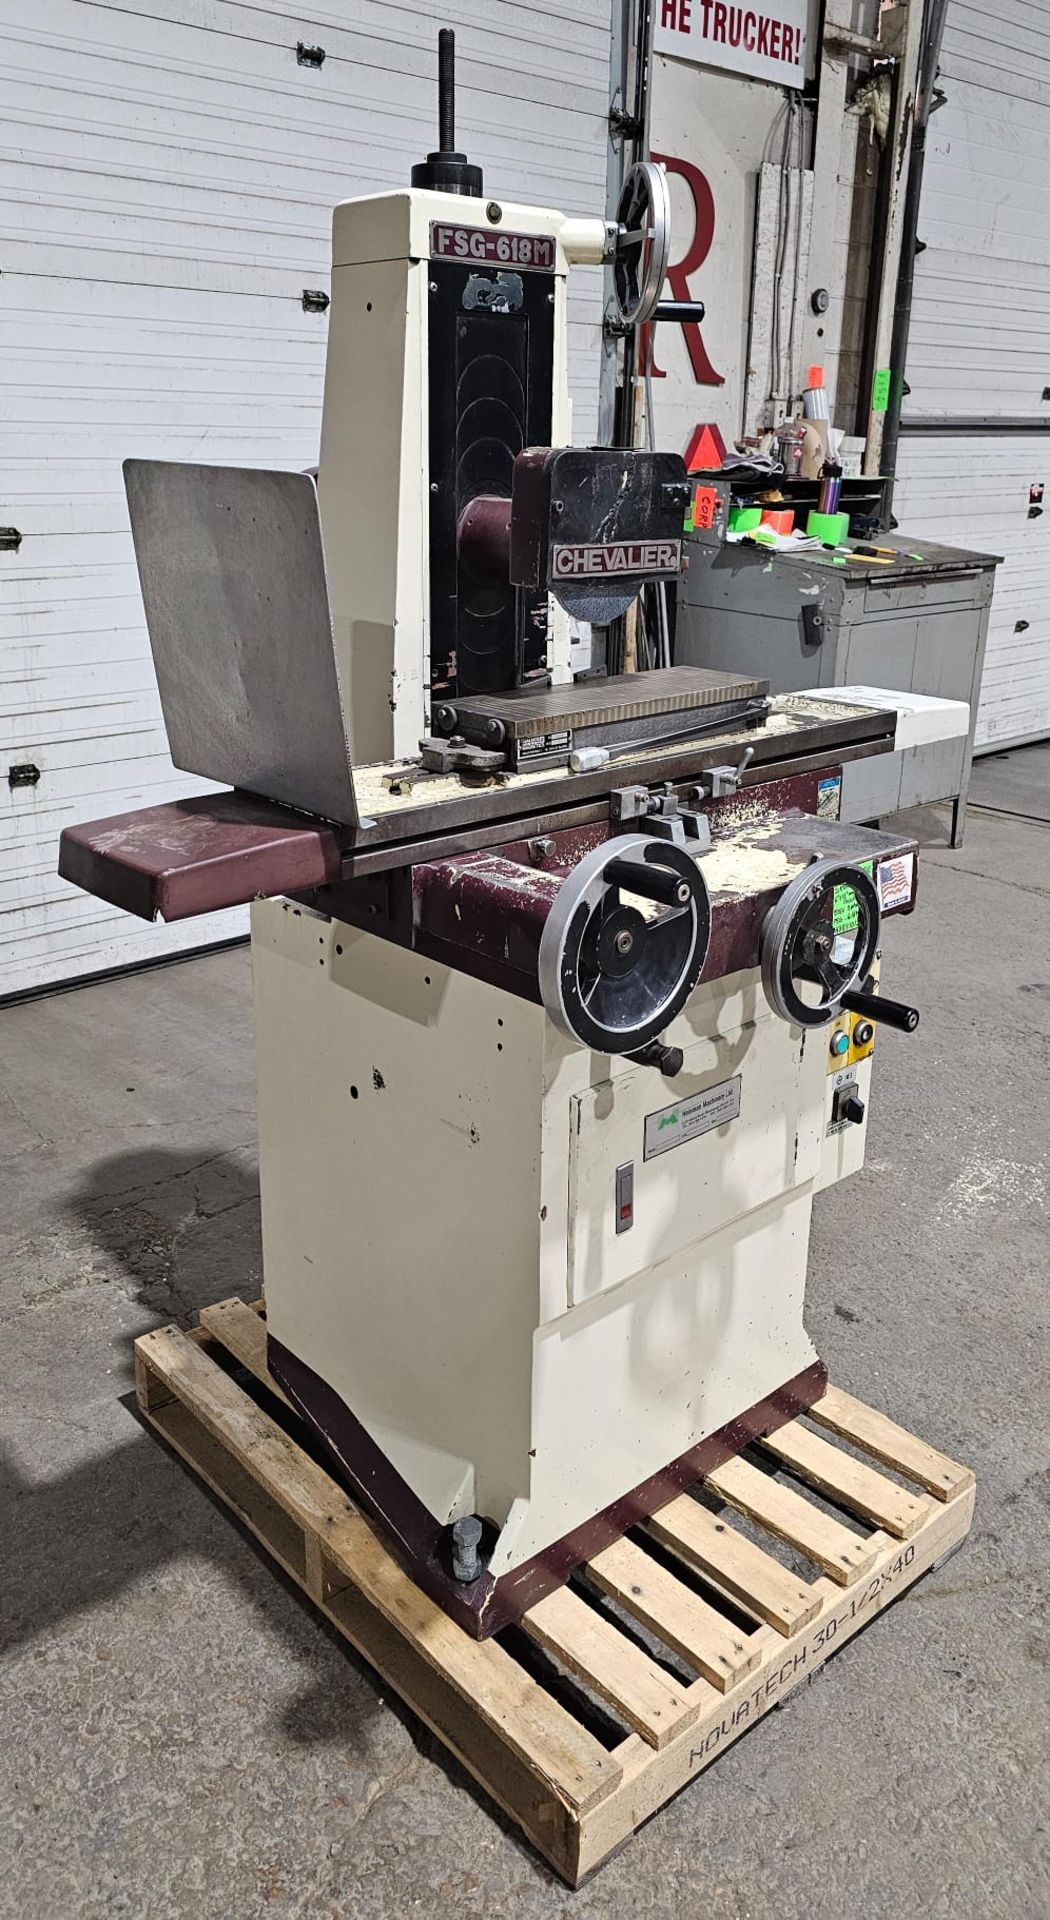 CHEVALIER Hydraulic Surface Grinder 18" x 6" Magnetic Chuck model: FSG-618M 575v 3 phase - Image 6 of 7